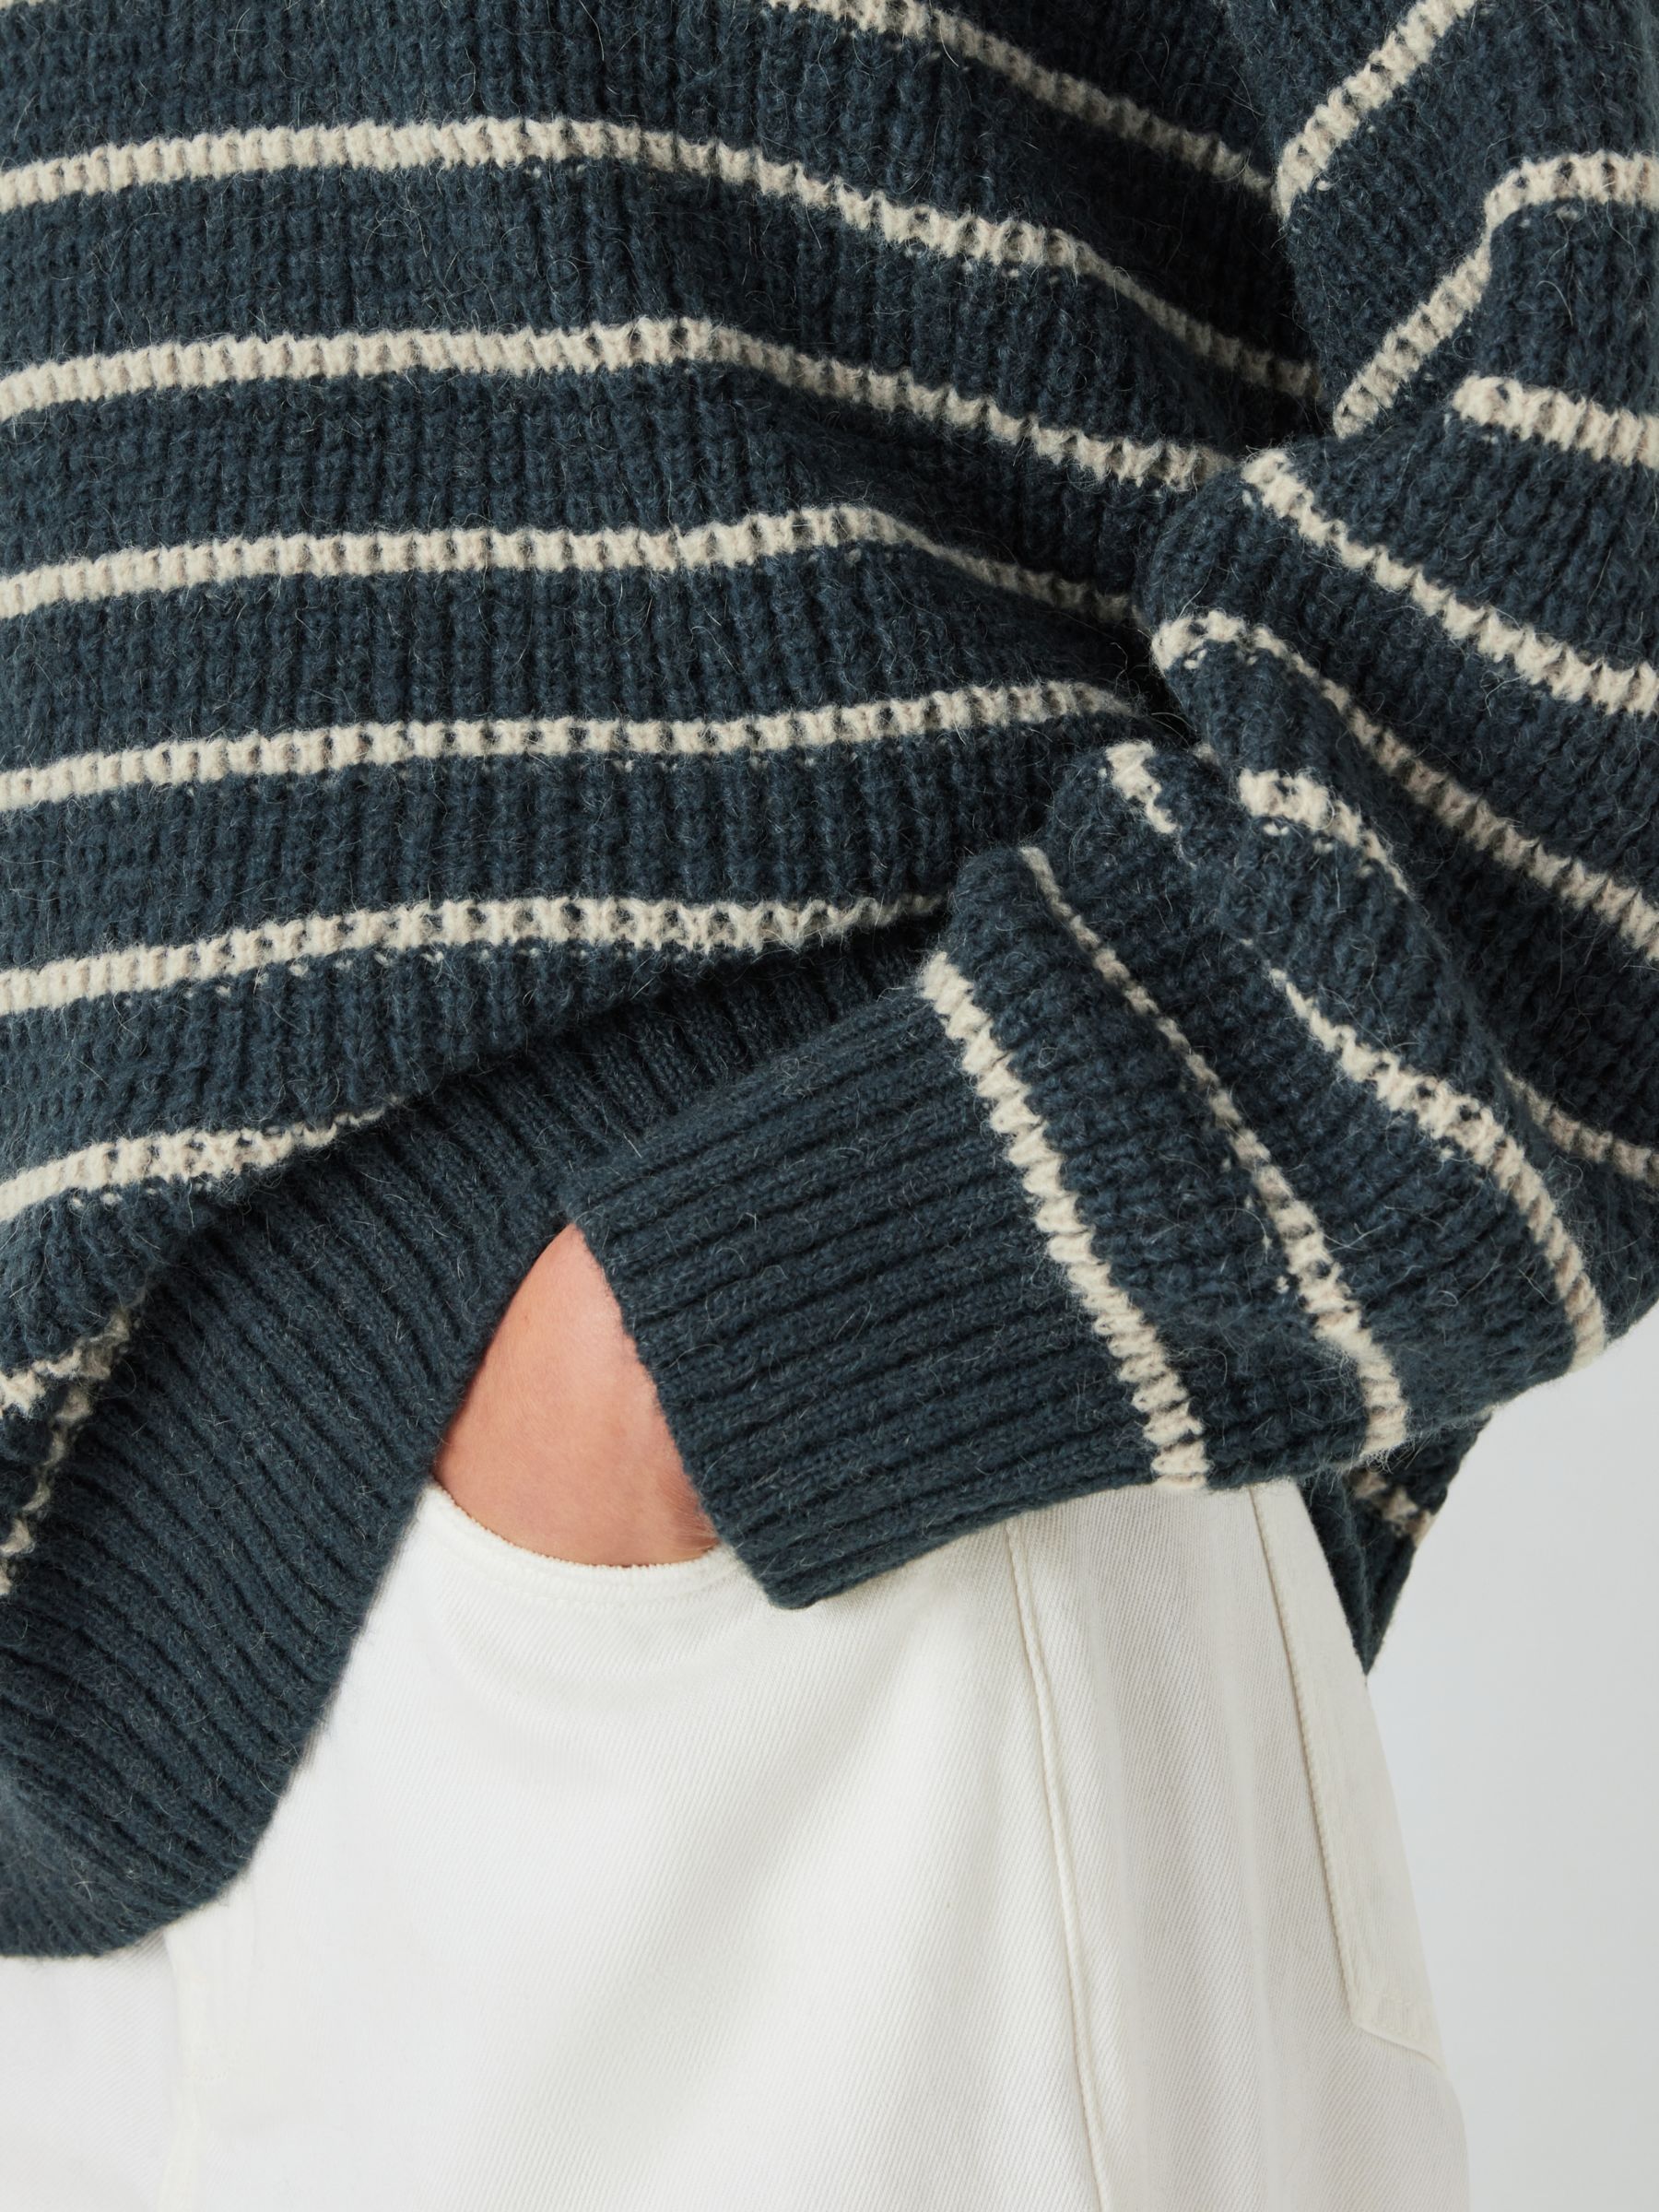 AND/OR Iris Oversized Stripe Jumper, Navy at John Lewis & Partners